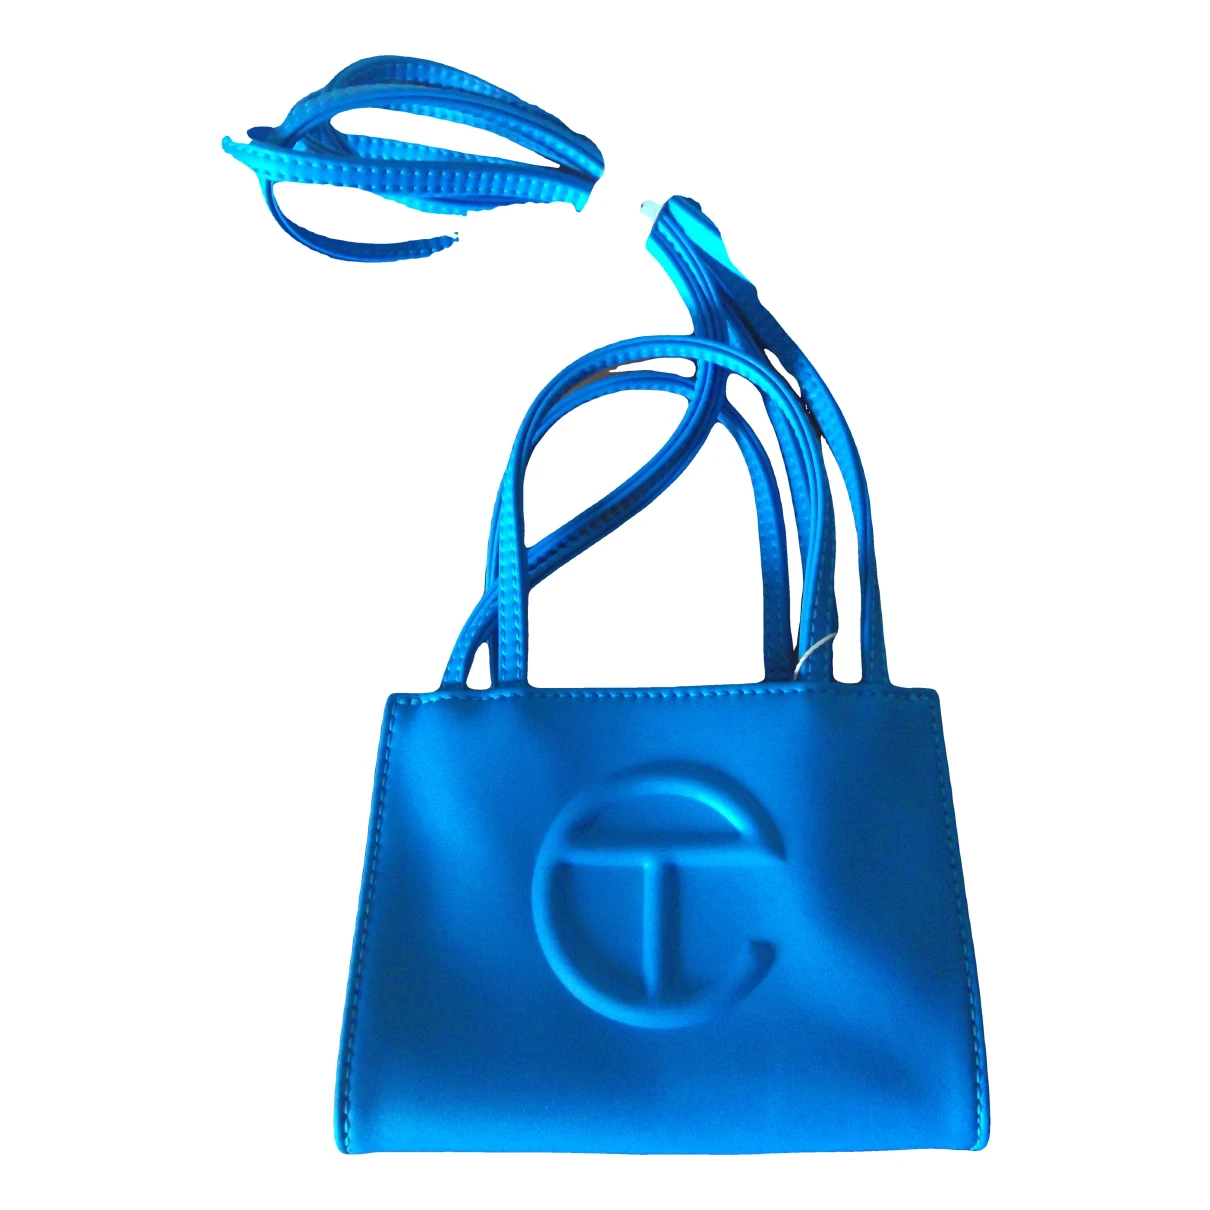 Pre-owned Telfar Small Shopping Bag Vegan Leather Tote In Blue